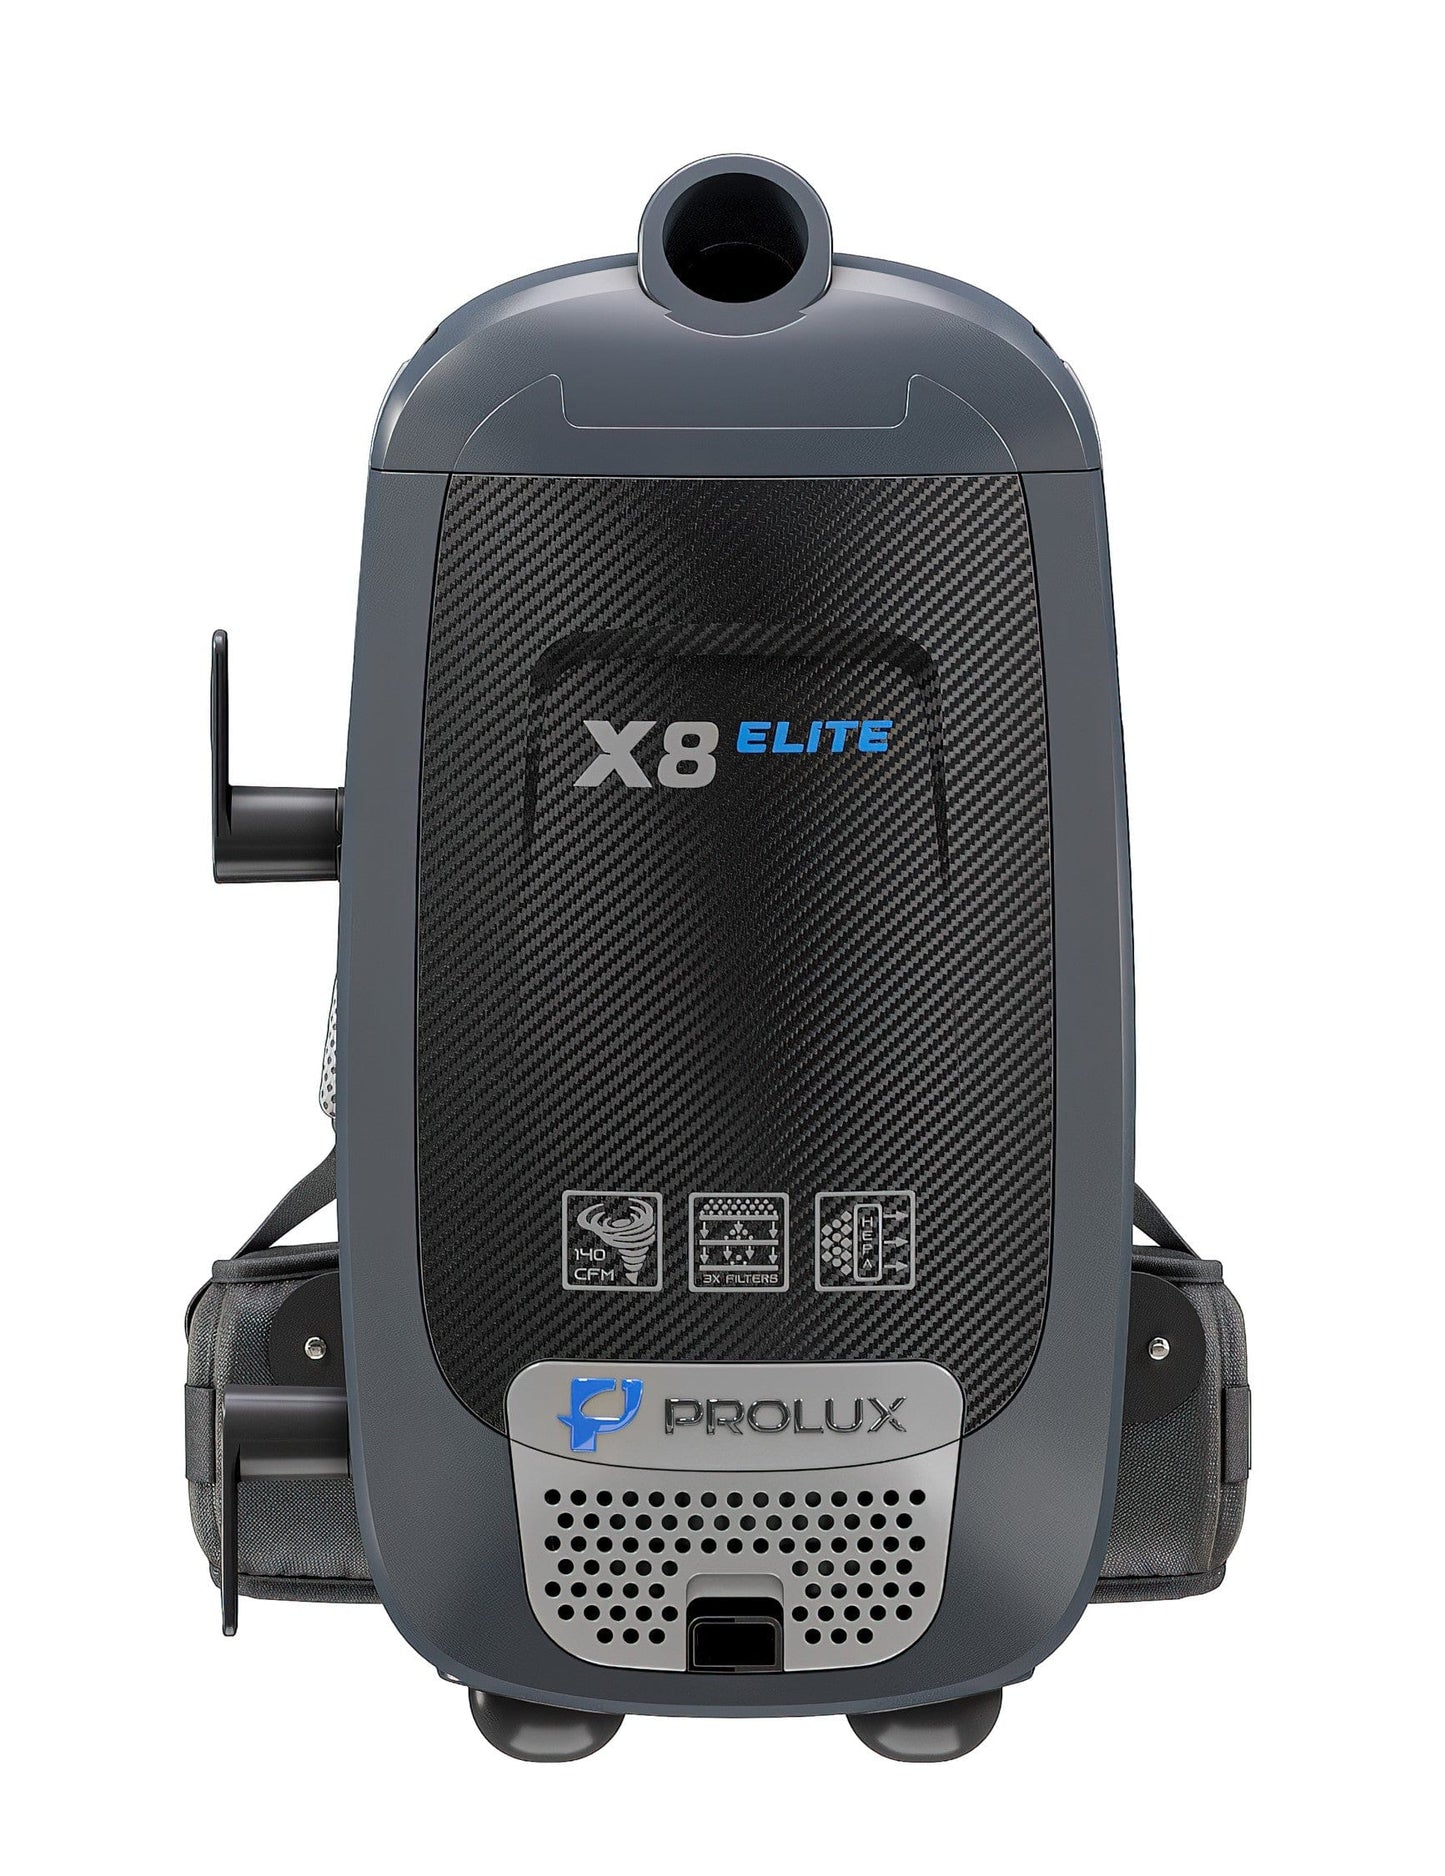 Prolux X8 Elite Backpack Vacuum Canister